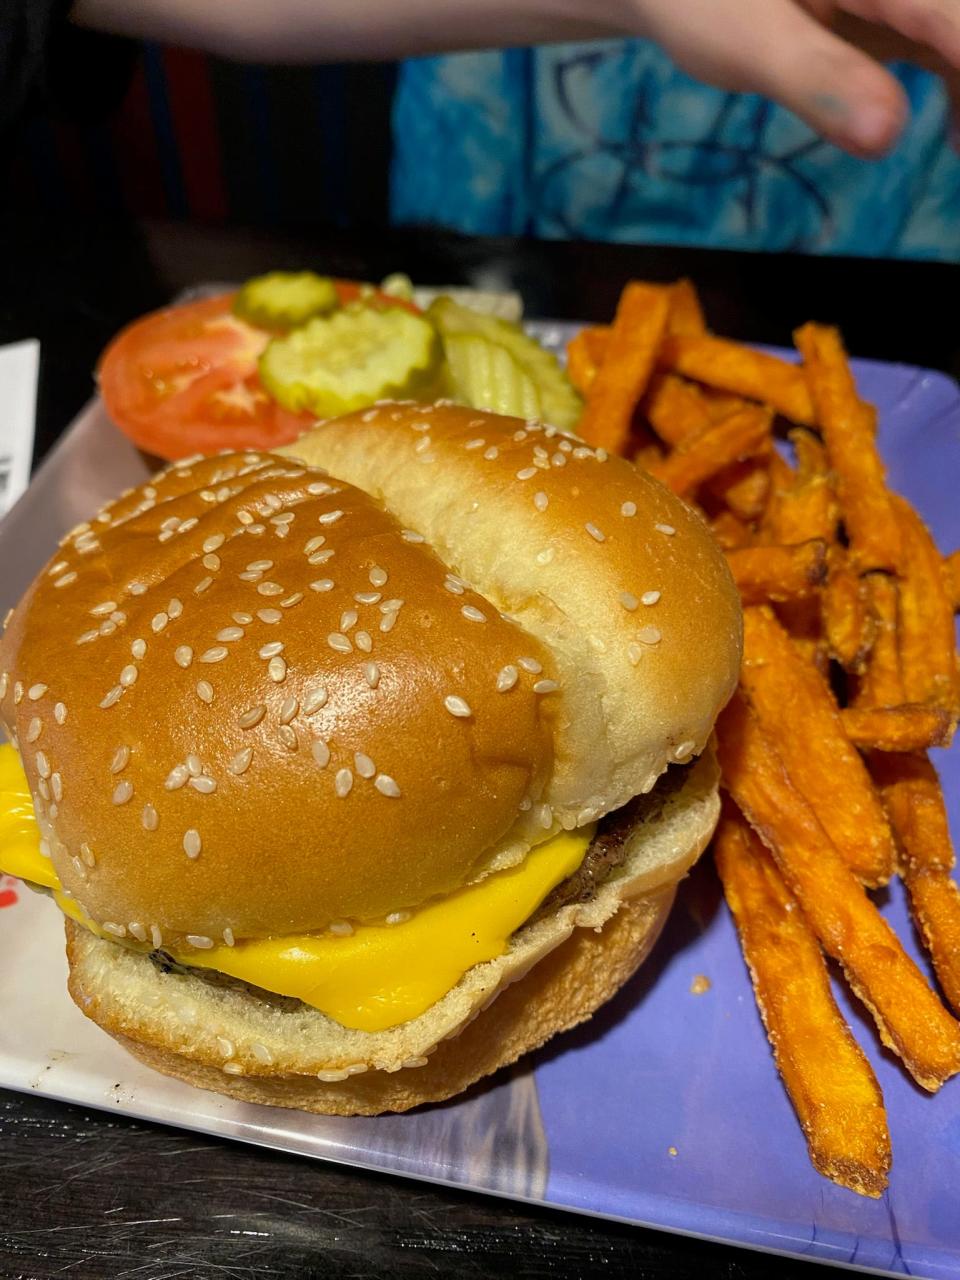 The cheeseburger kids' meal at Red Robin.